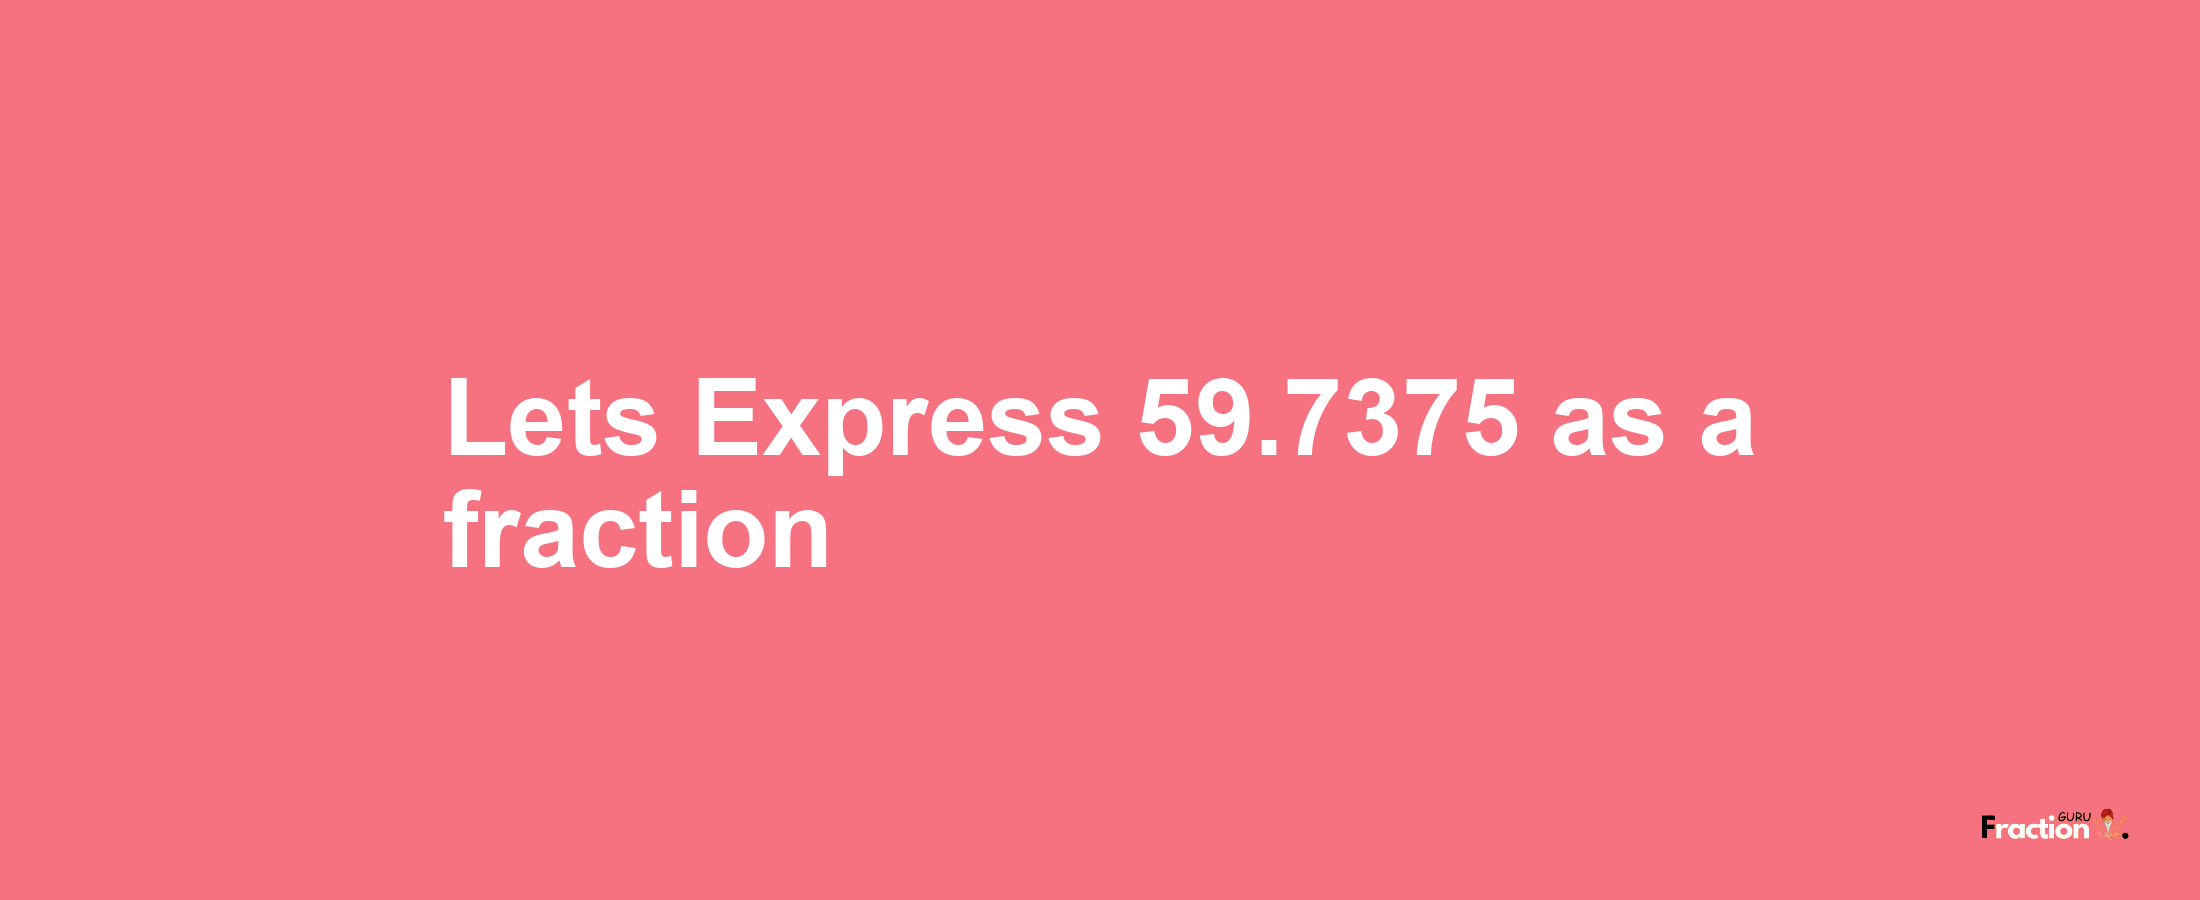 Lets Express 59.7375 as afraction